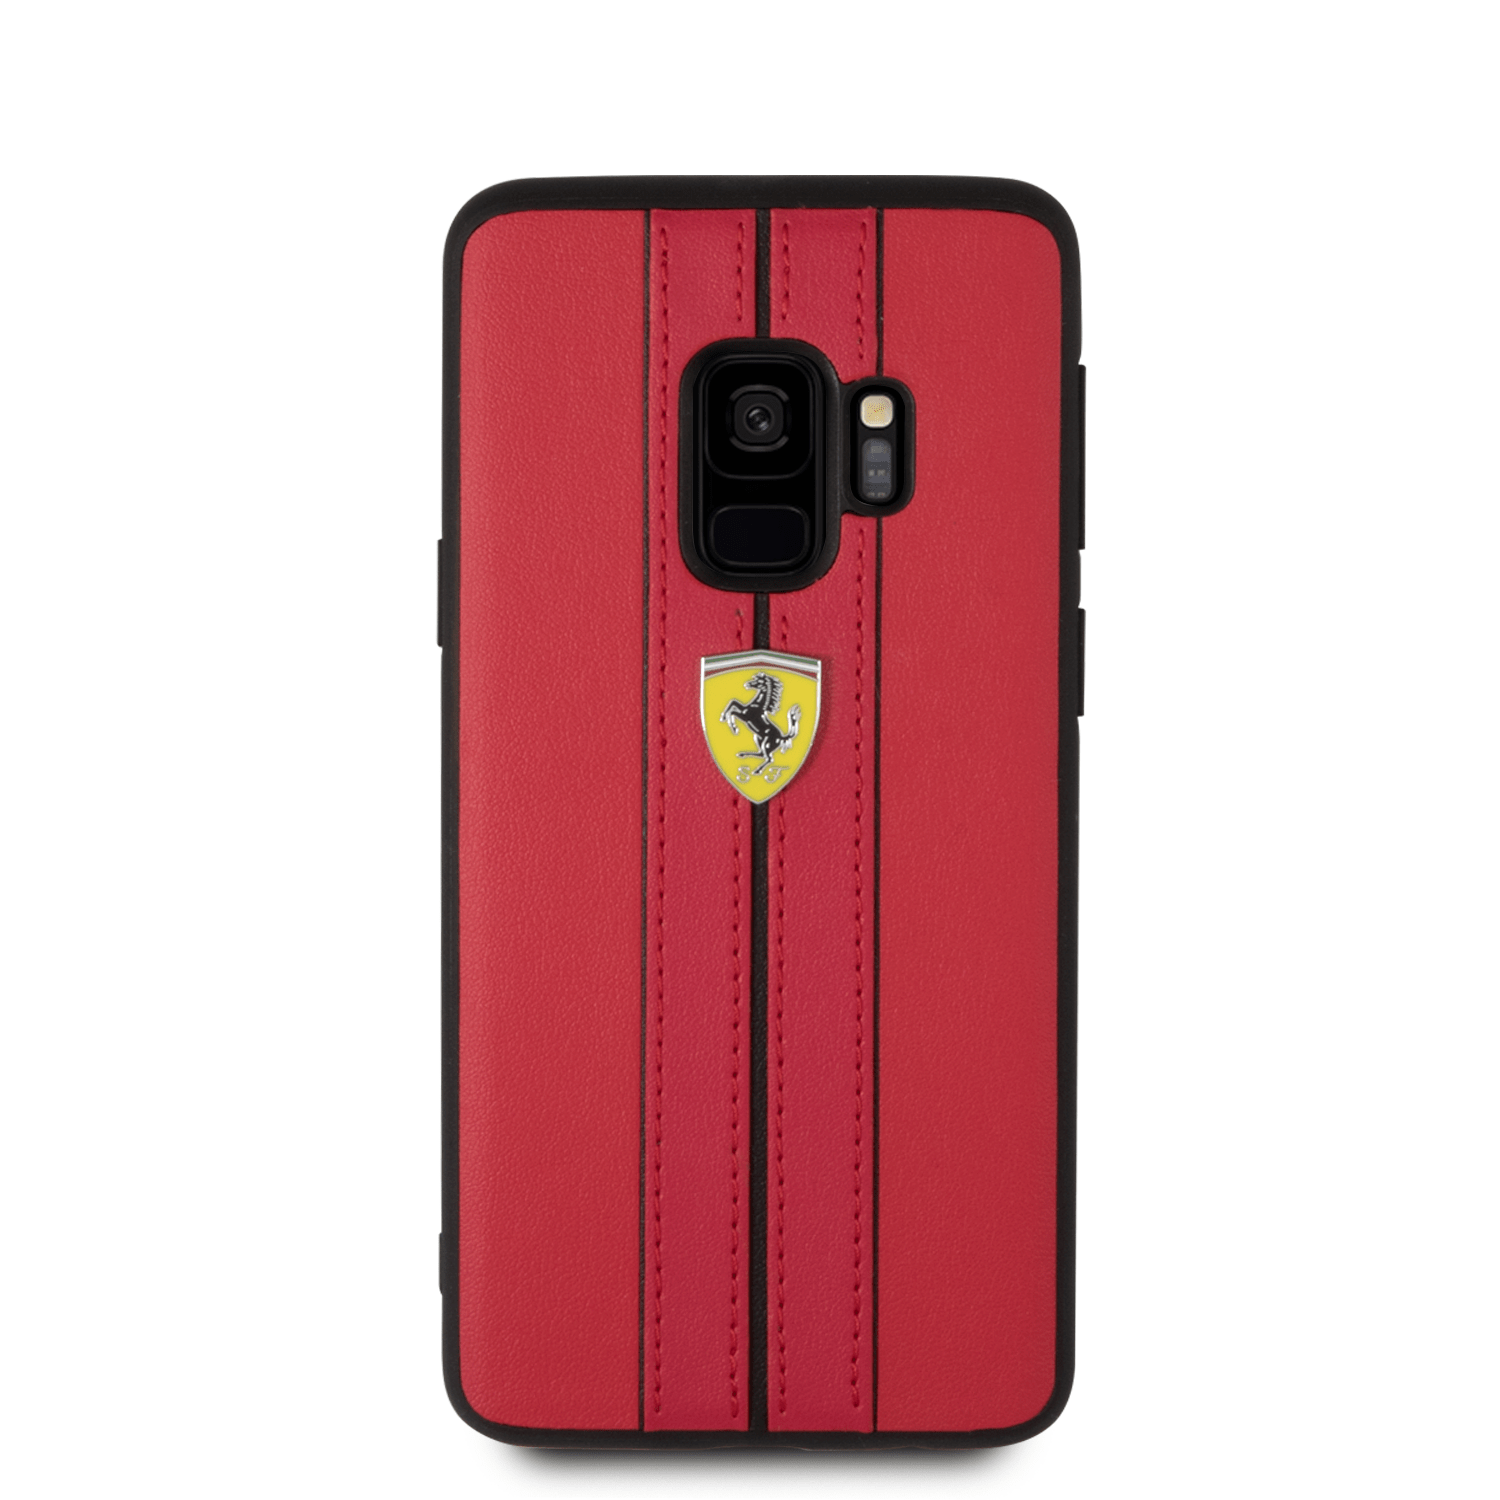 A PU leather hard case designed to protect your personal device with deluxe style